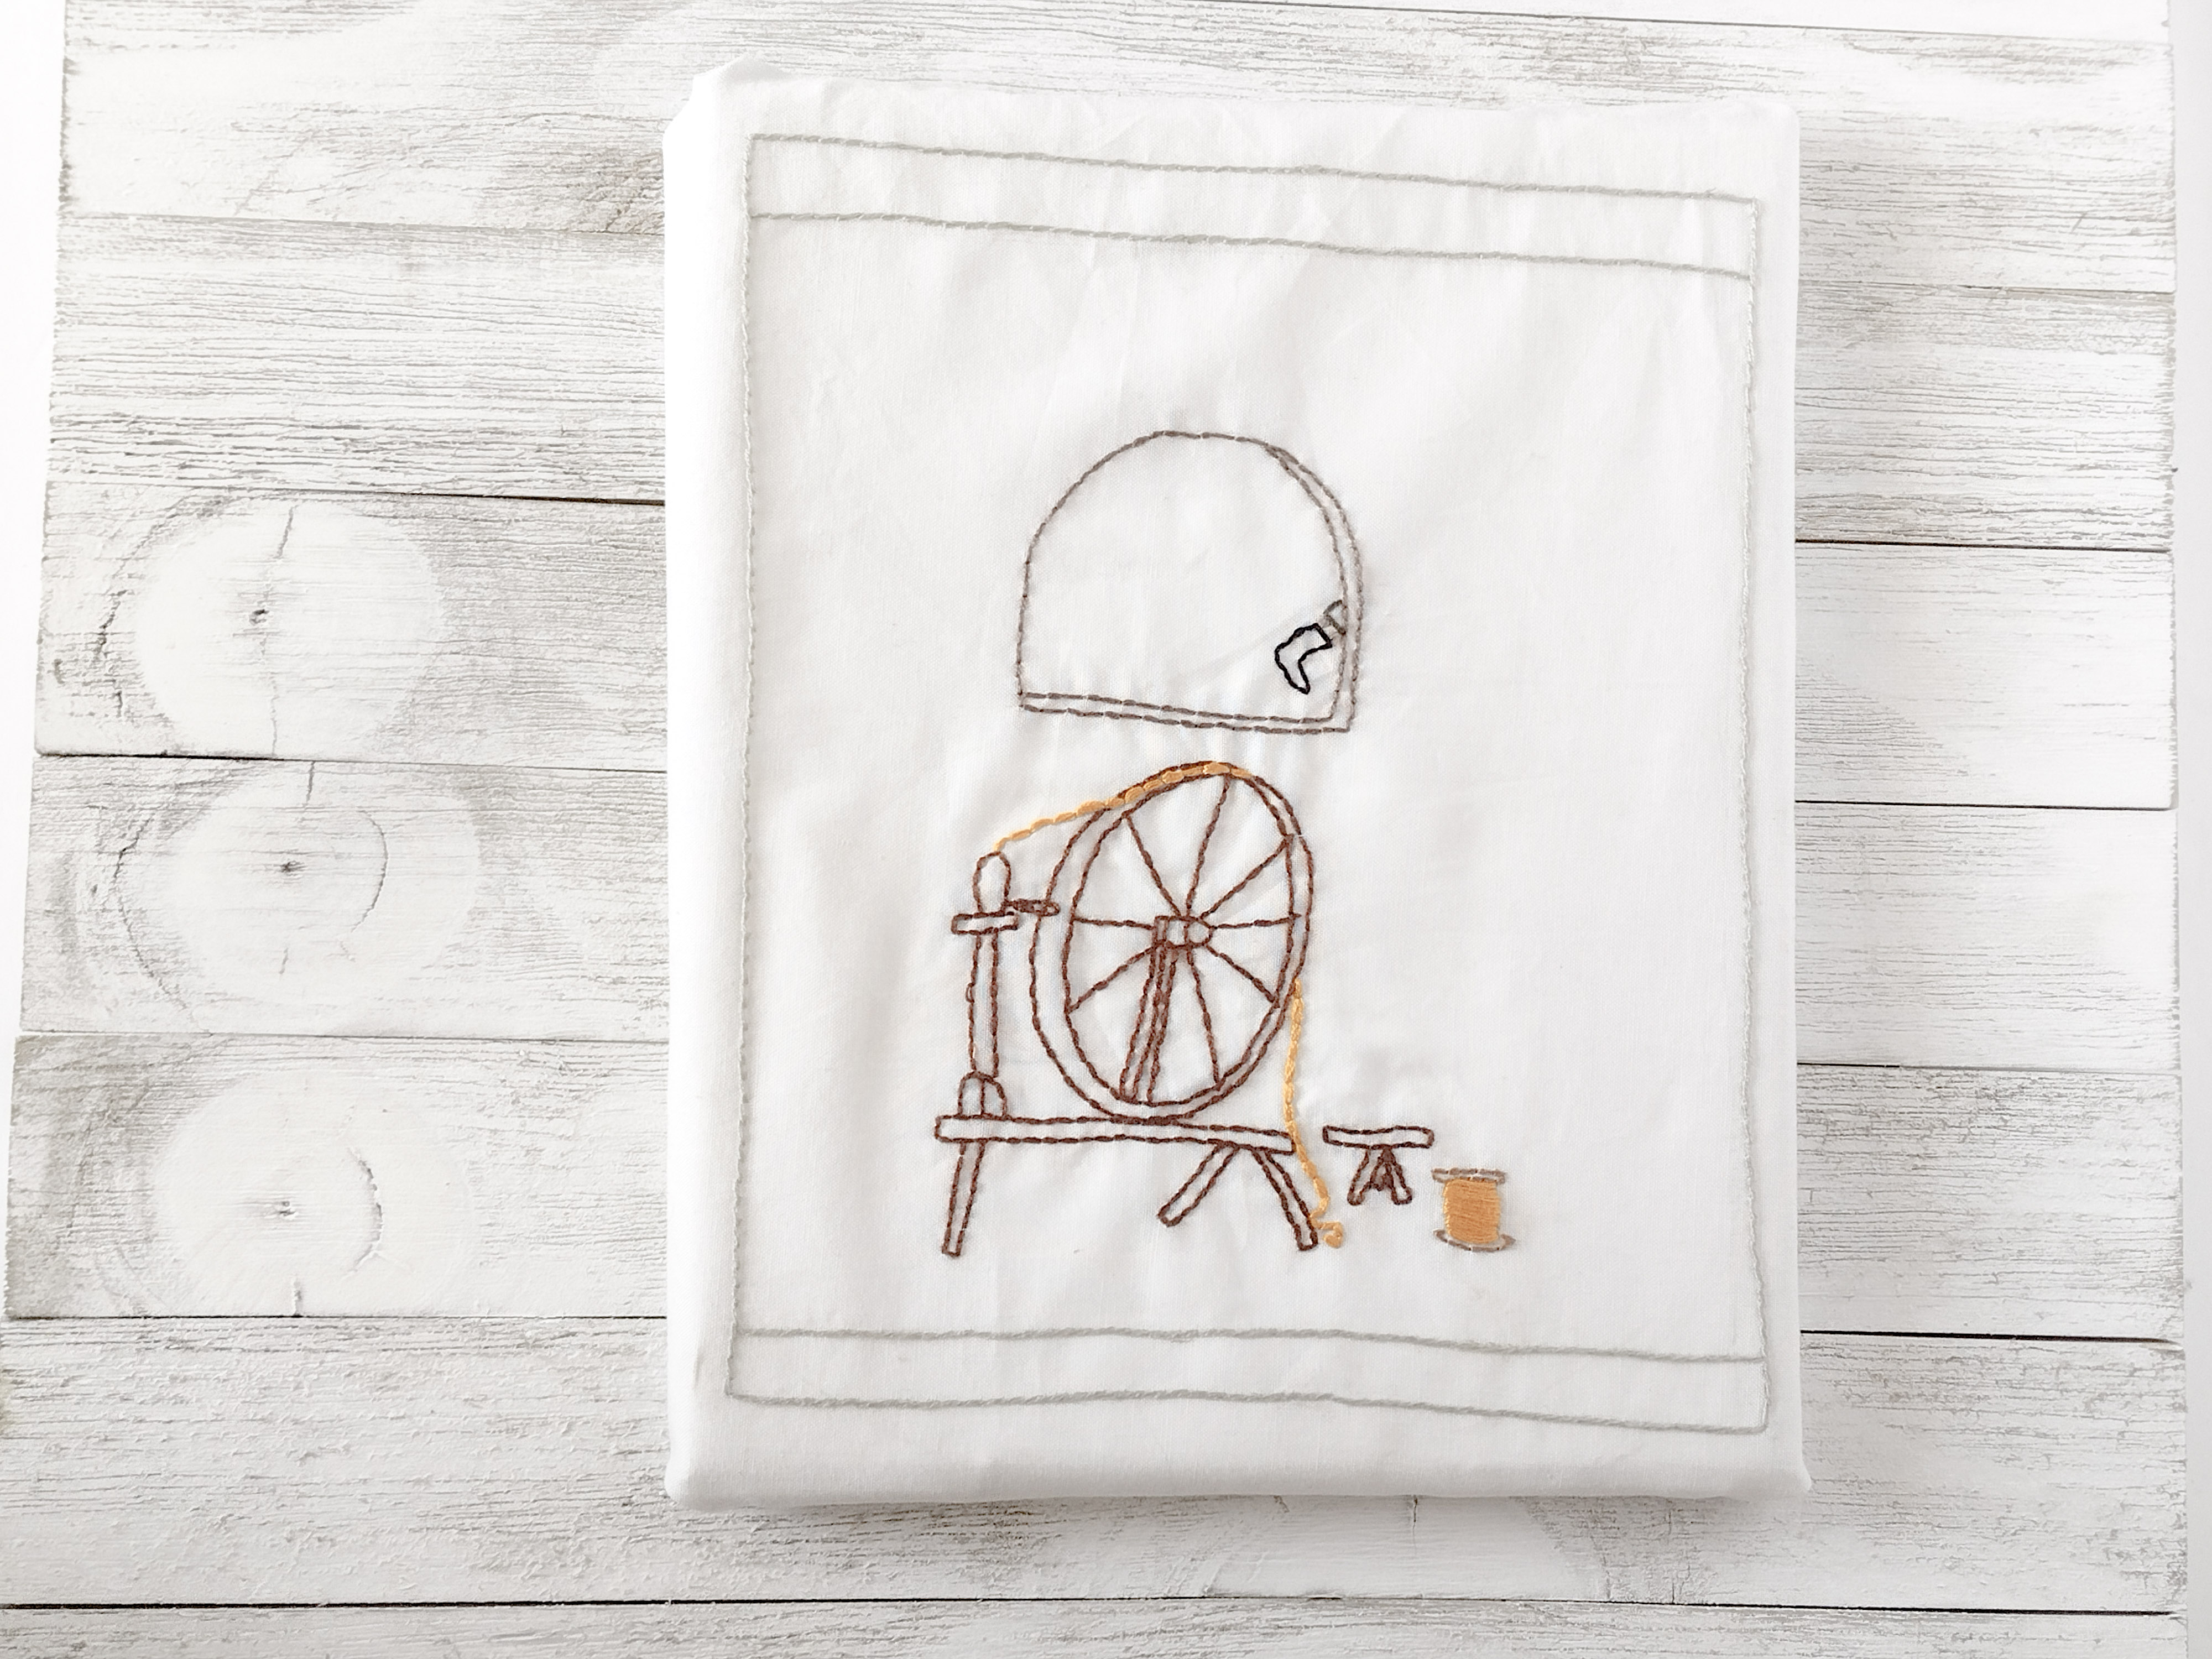 embroidery pattern of a spinning wheel, gold thread, and a window